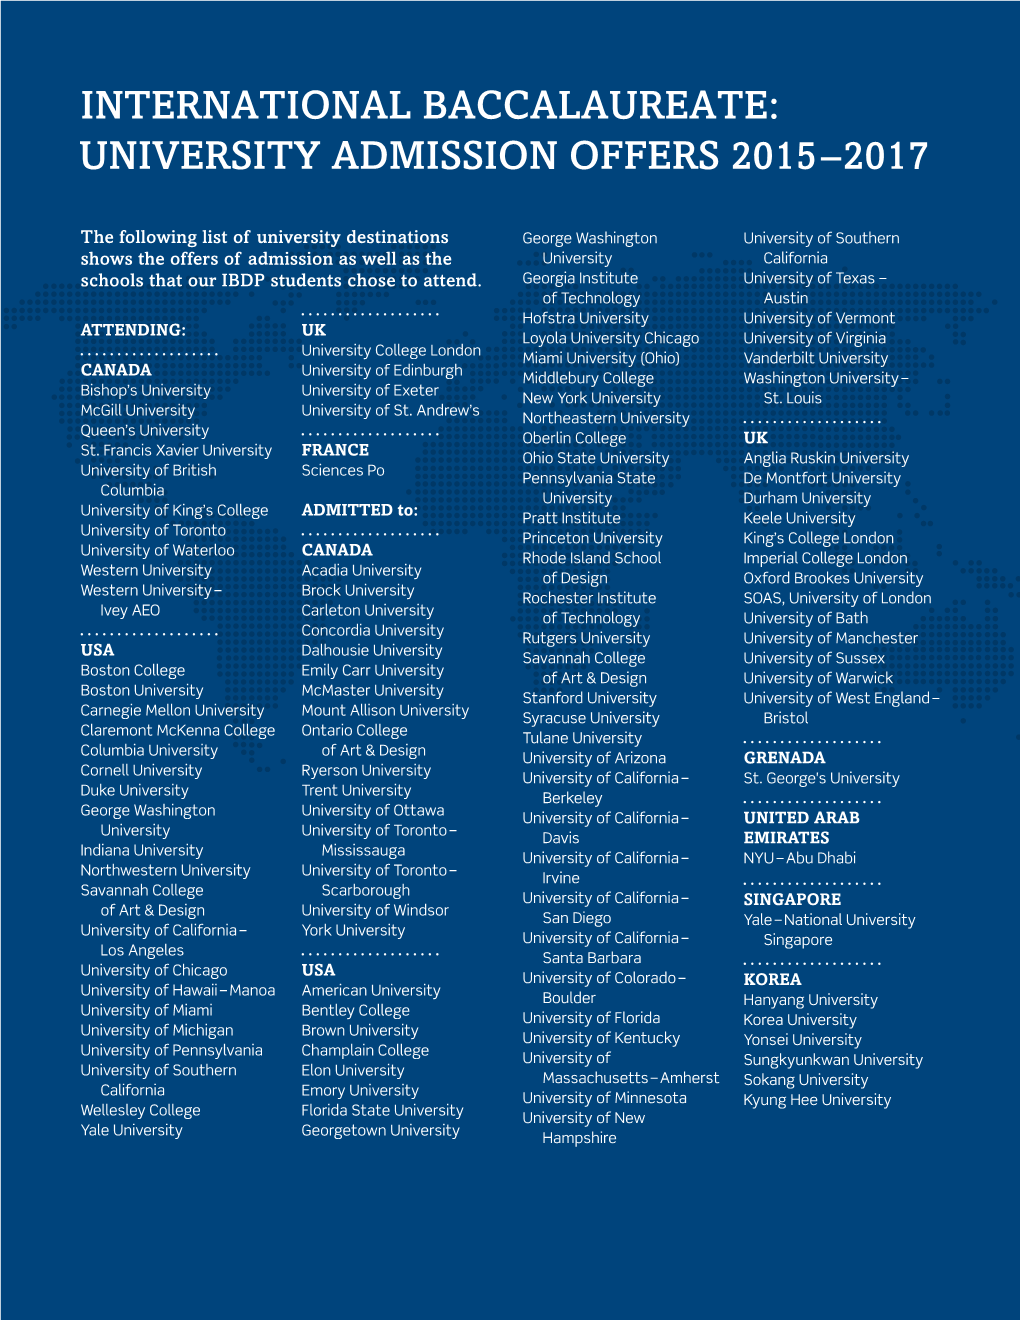 University Admission Offers 2015–2017